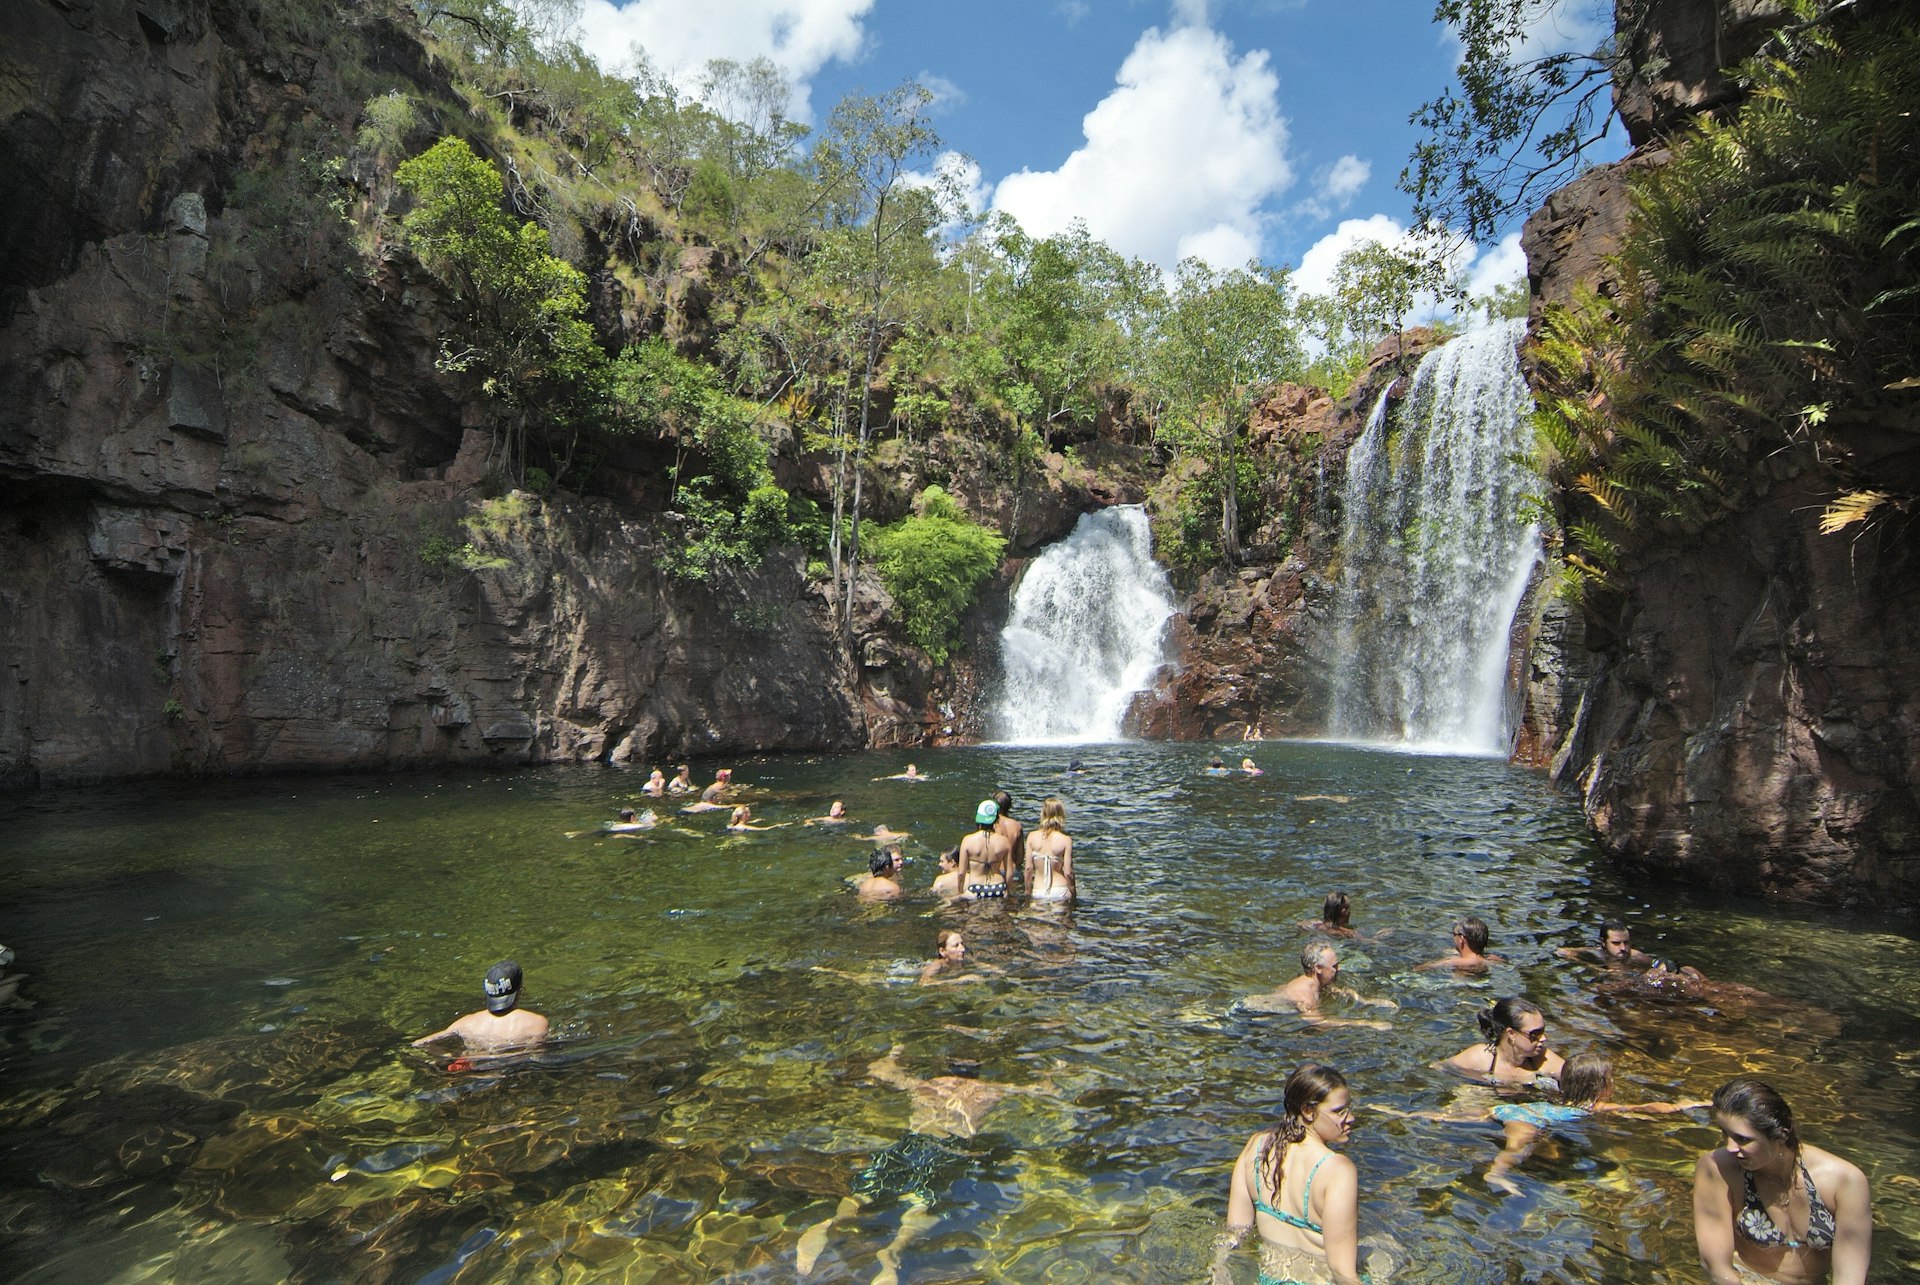 Unidentified people enjoy a swim in the natoral pool of Florence falls in Litchfield National park in Australia Northern Territory, 